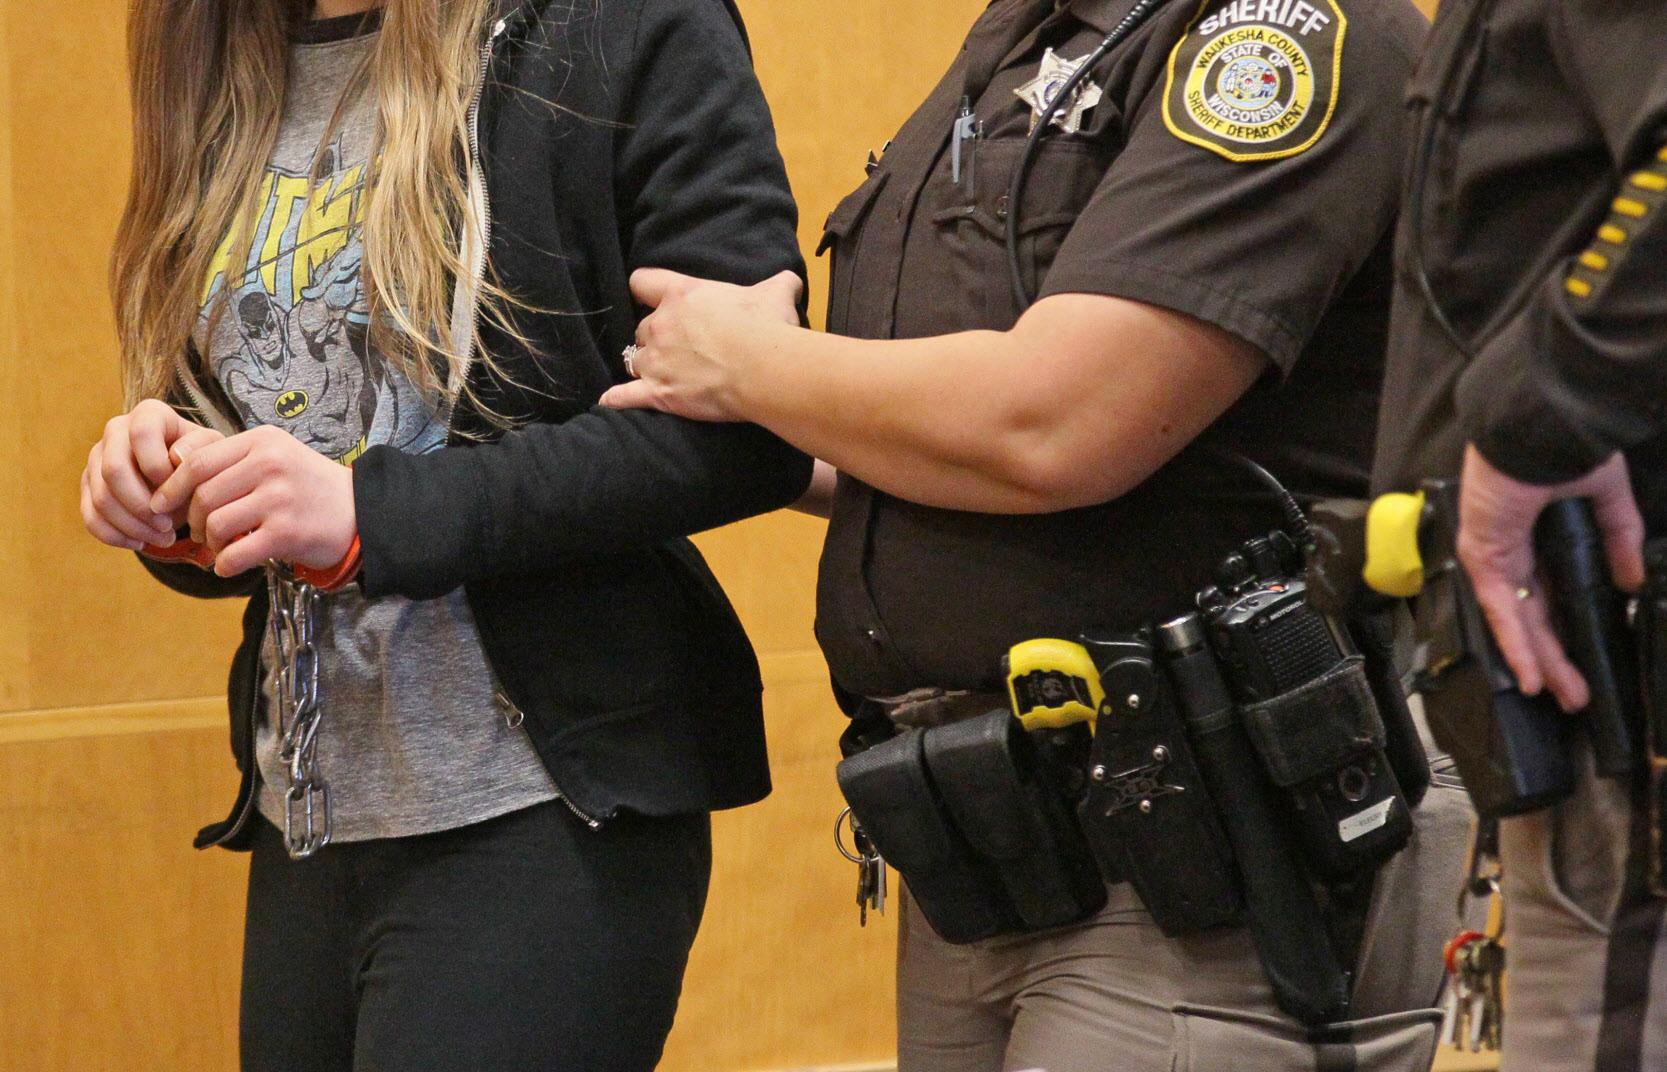 Slender Man Child Stabbers To Be Tried As Adults Washington Times